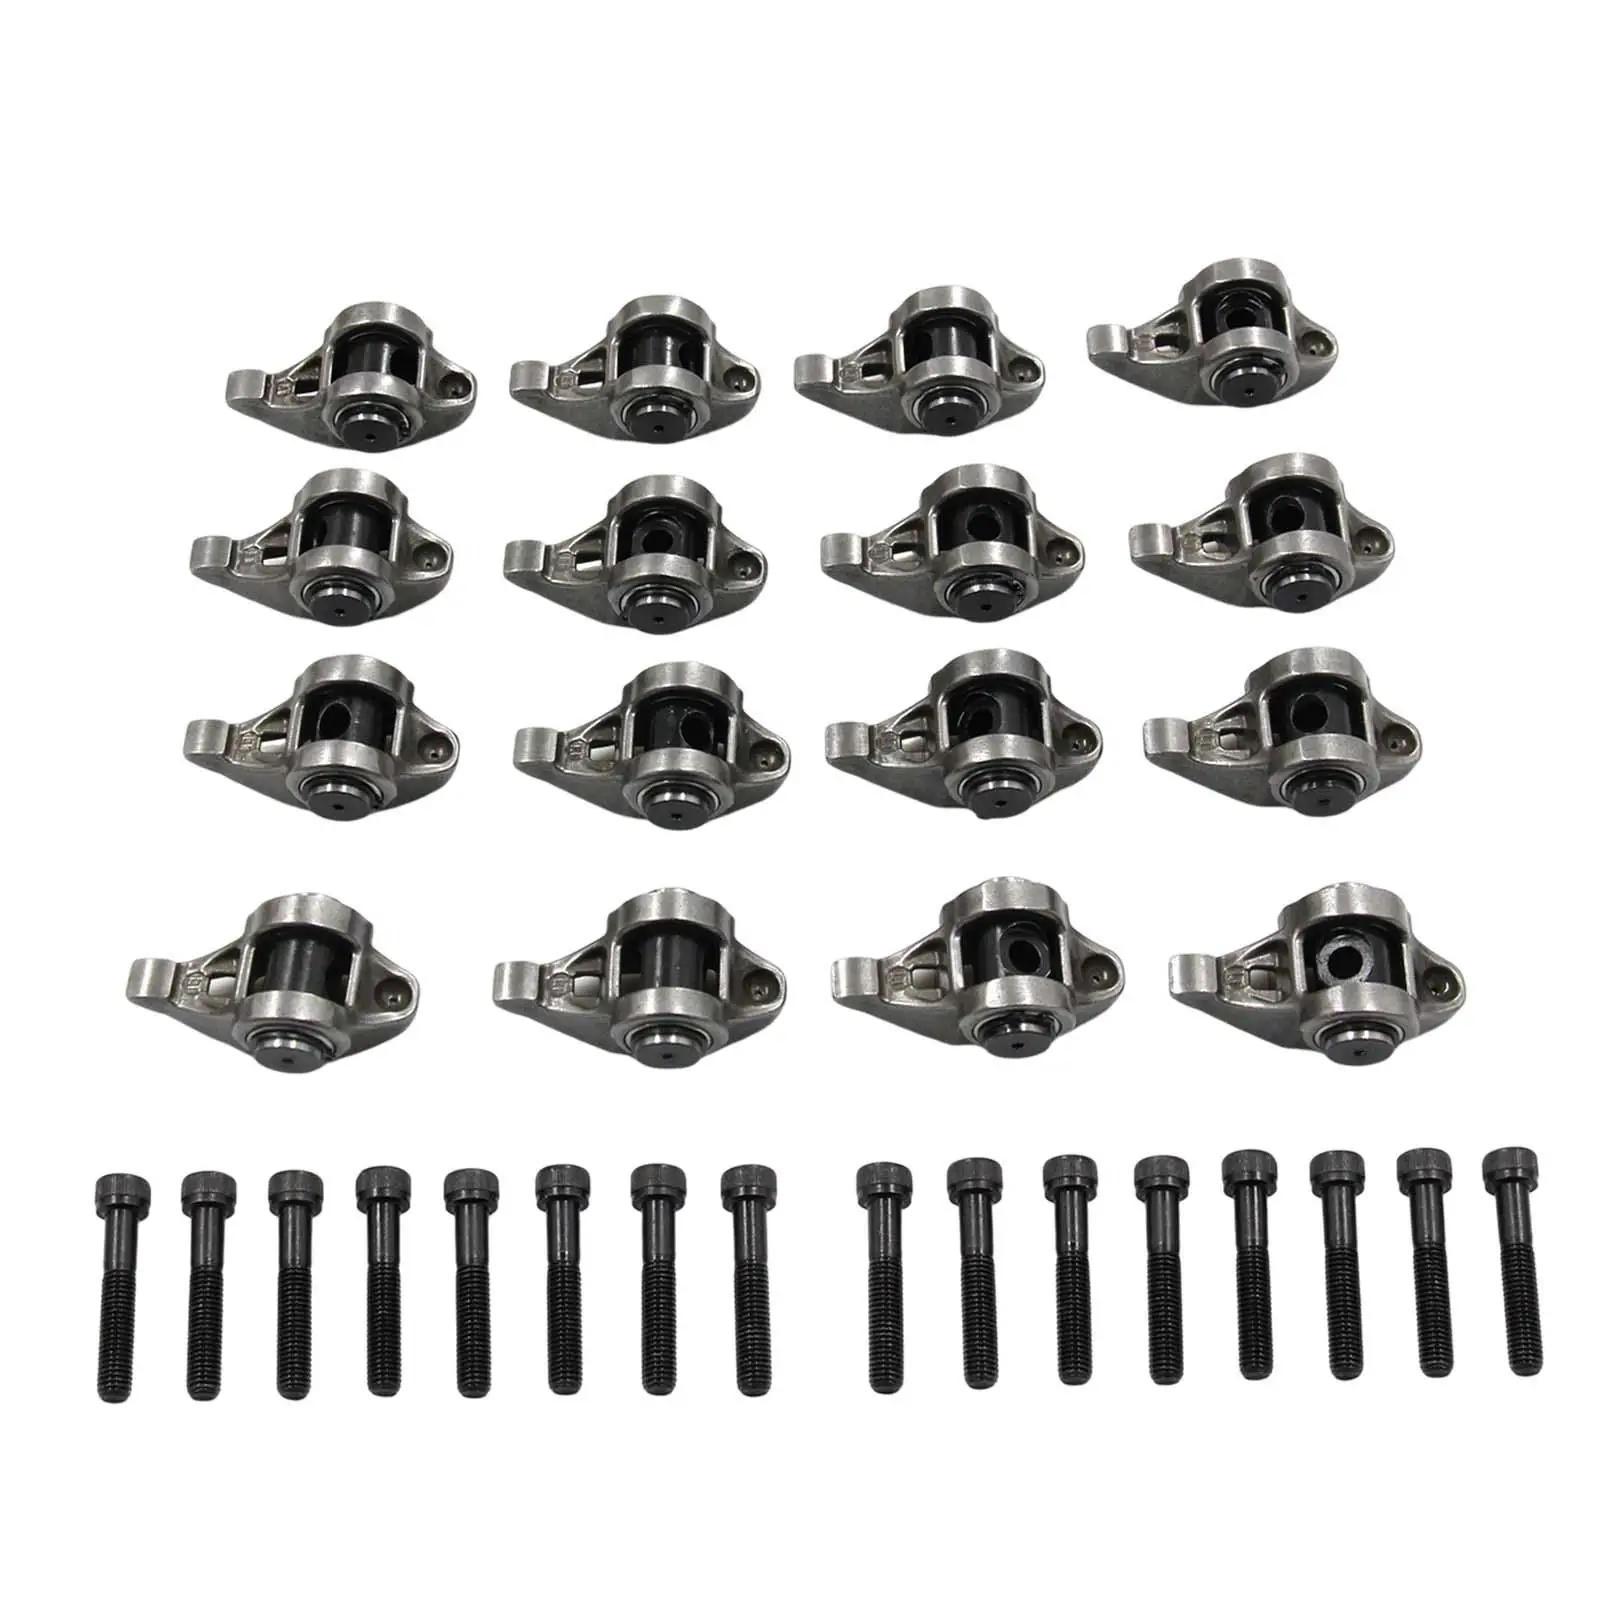 16x Rocker Arms and Bolts Kit for Chevrolet LS1 LS2 LS6 LM7 L59 LM4 L33